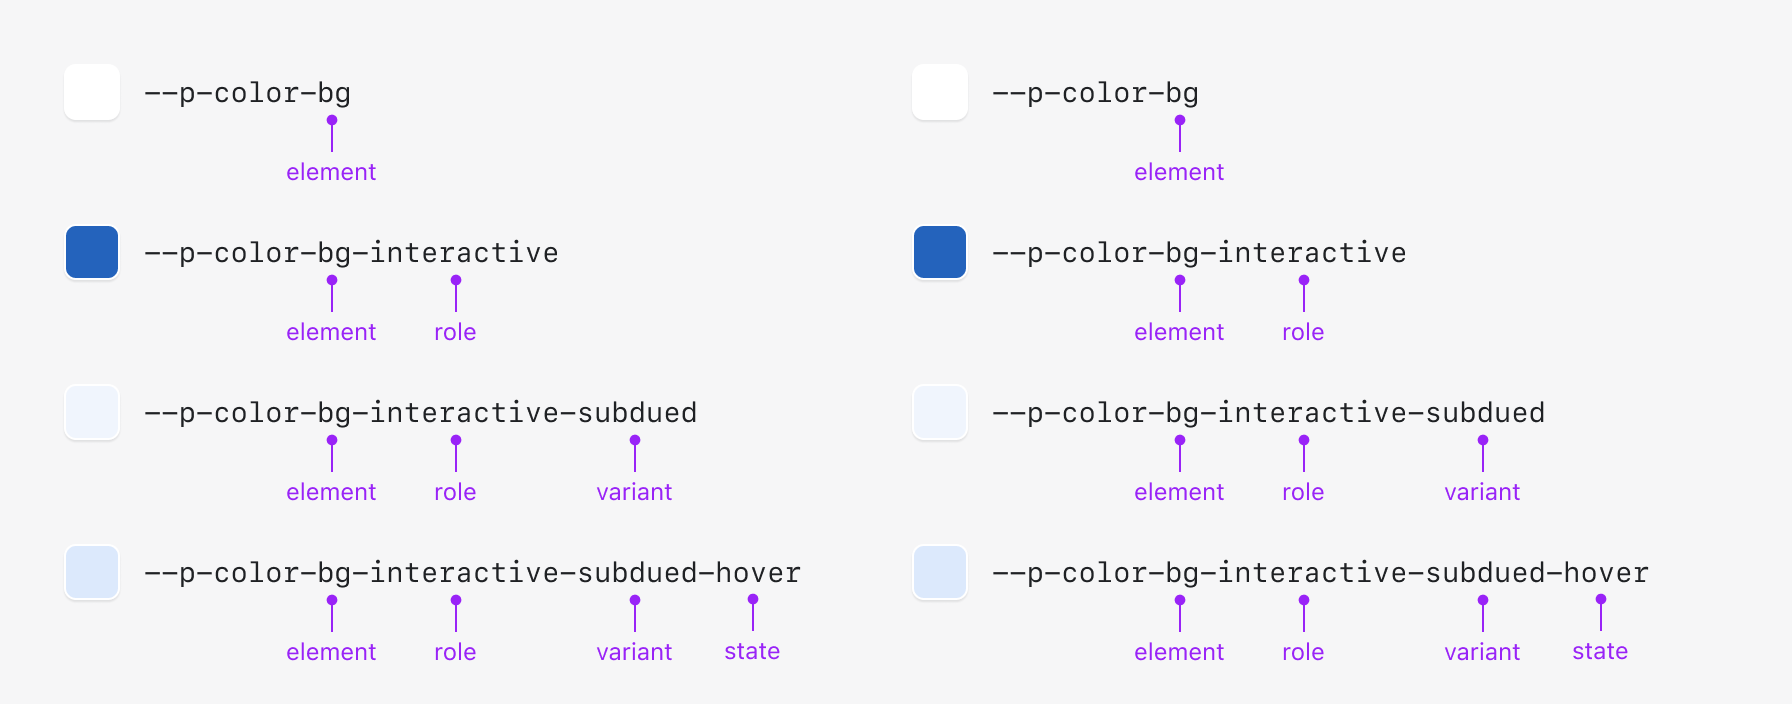 A list of token name examples showing how the element, role, variant and state are applied to color tokens